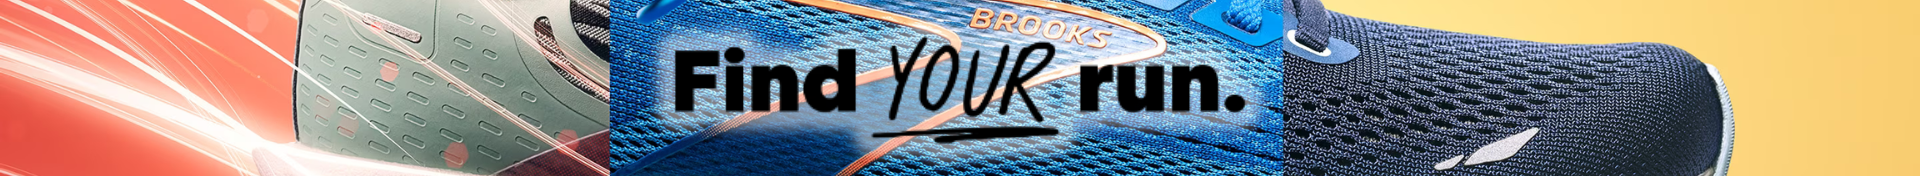 Find Your Run with Brooks